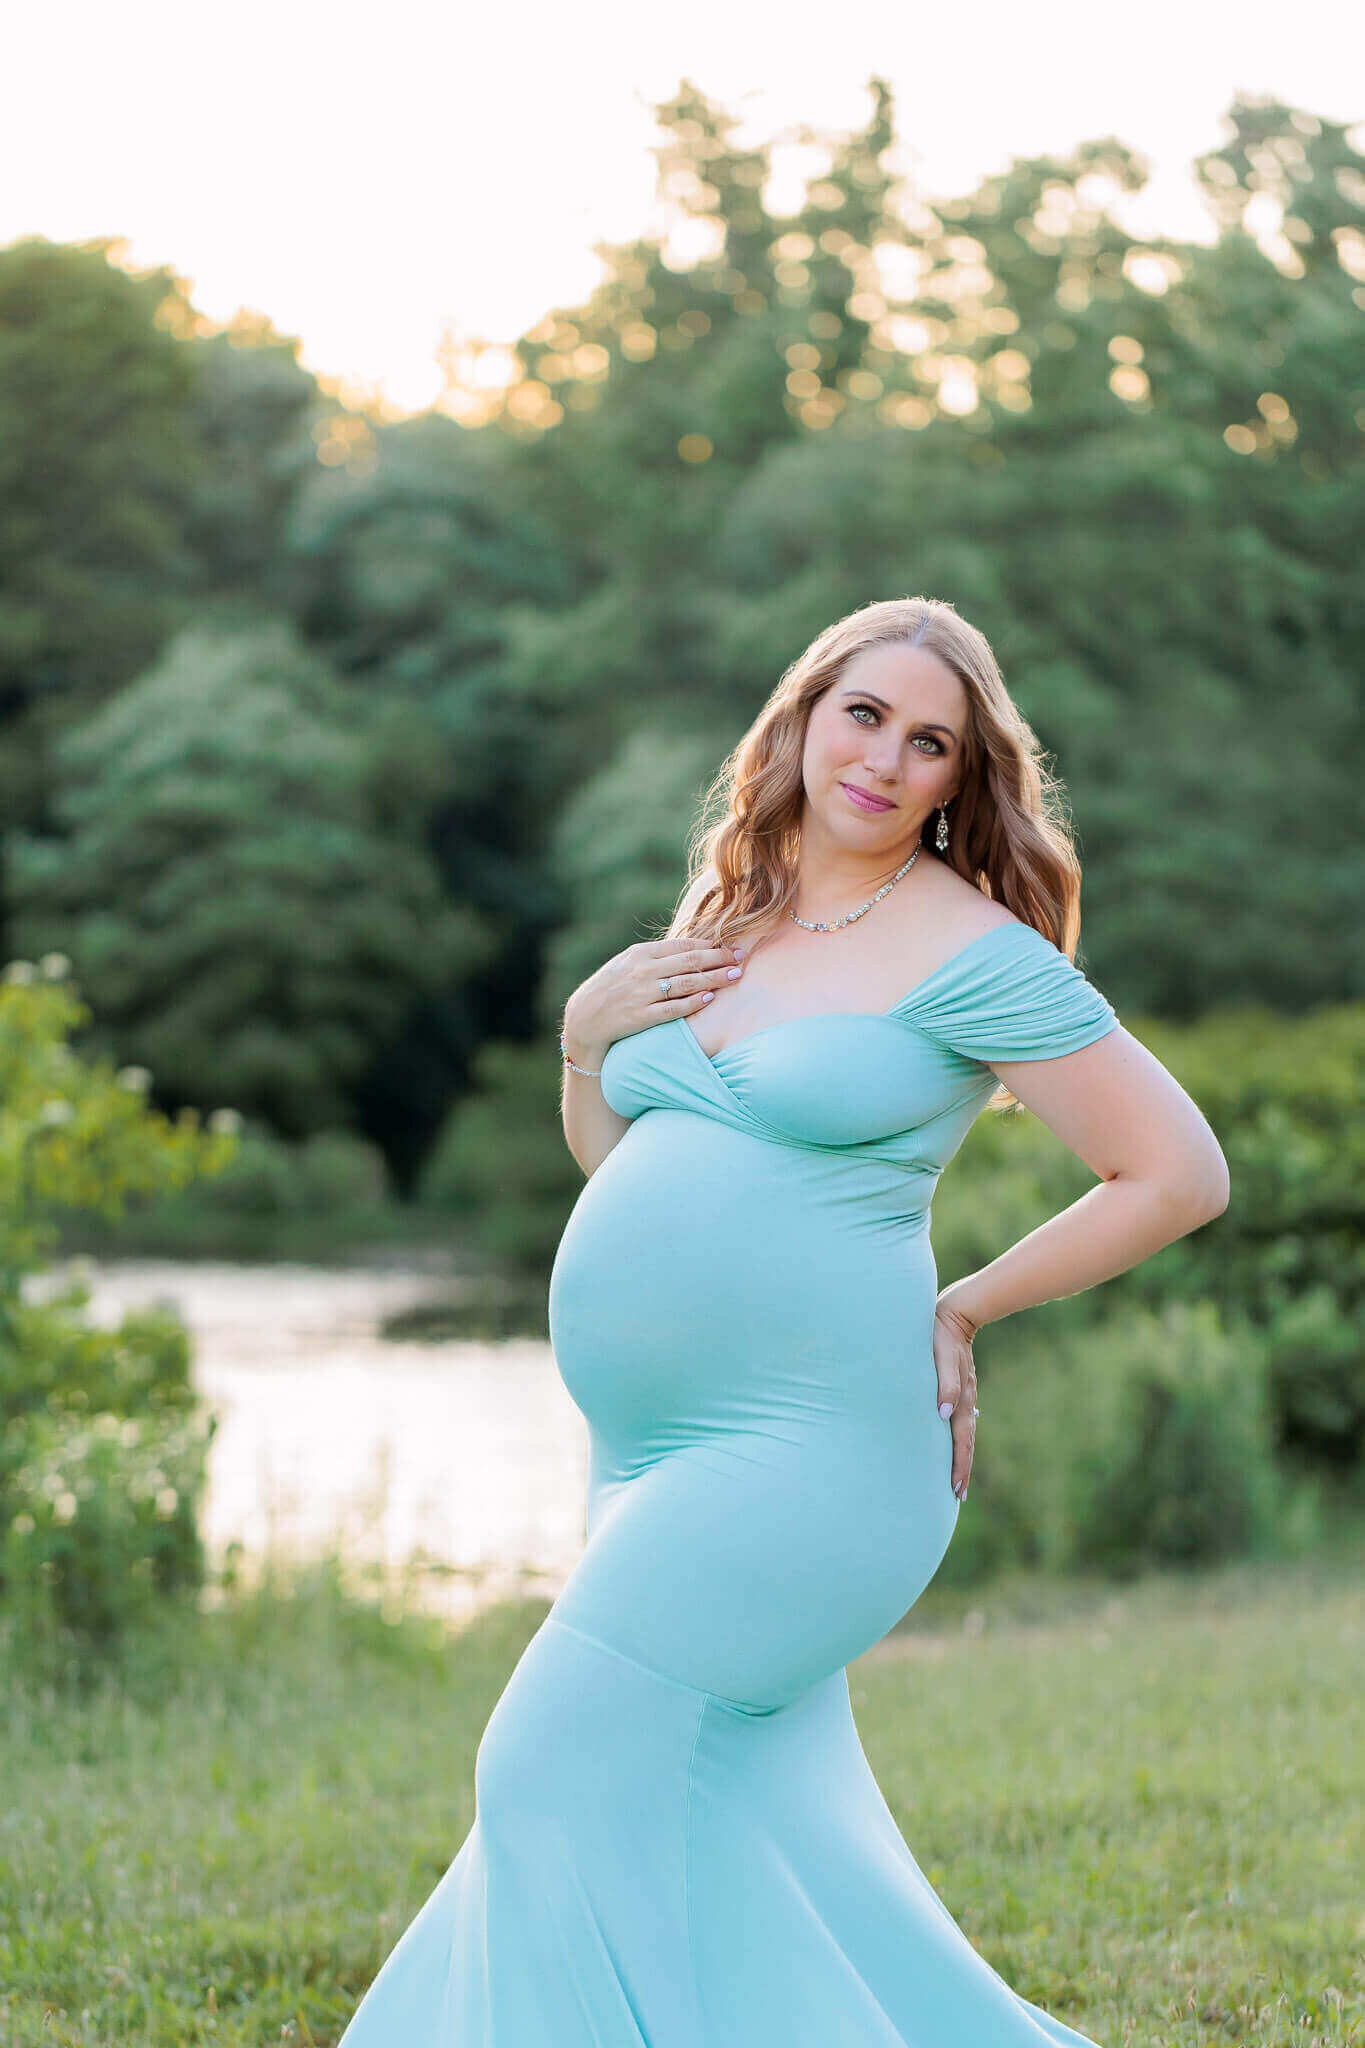 An outdoor maternity portrait session of a pregnant woman in a blue dress at Royal Lake.